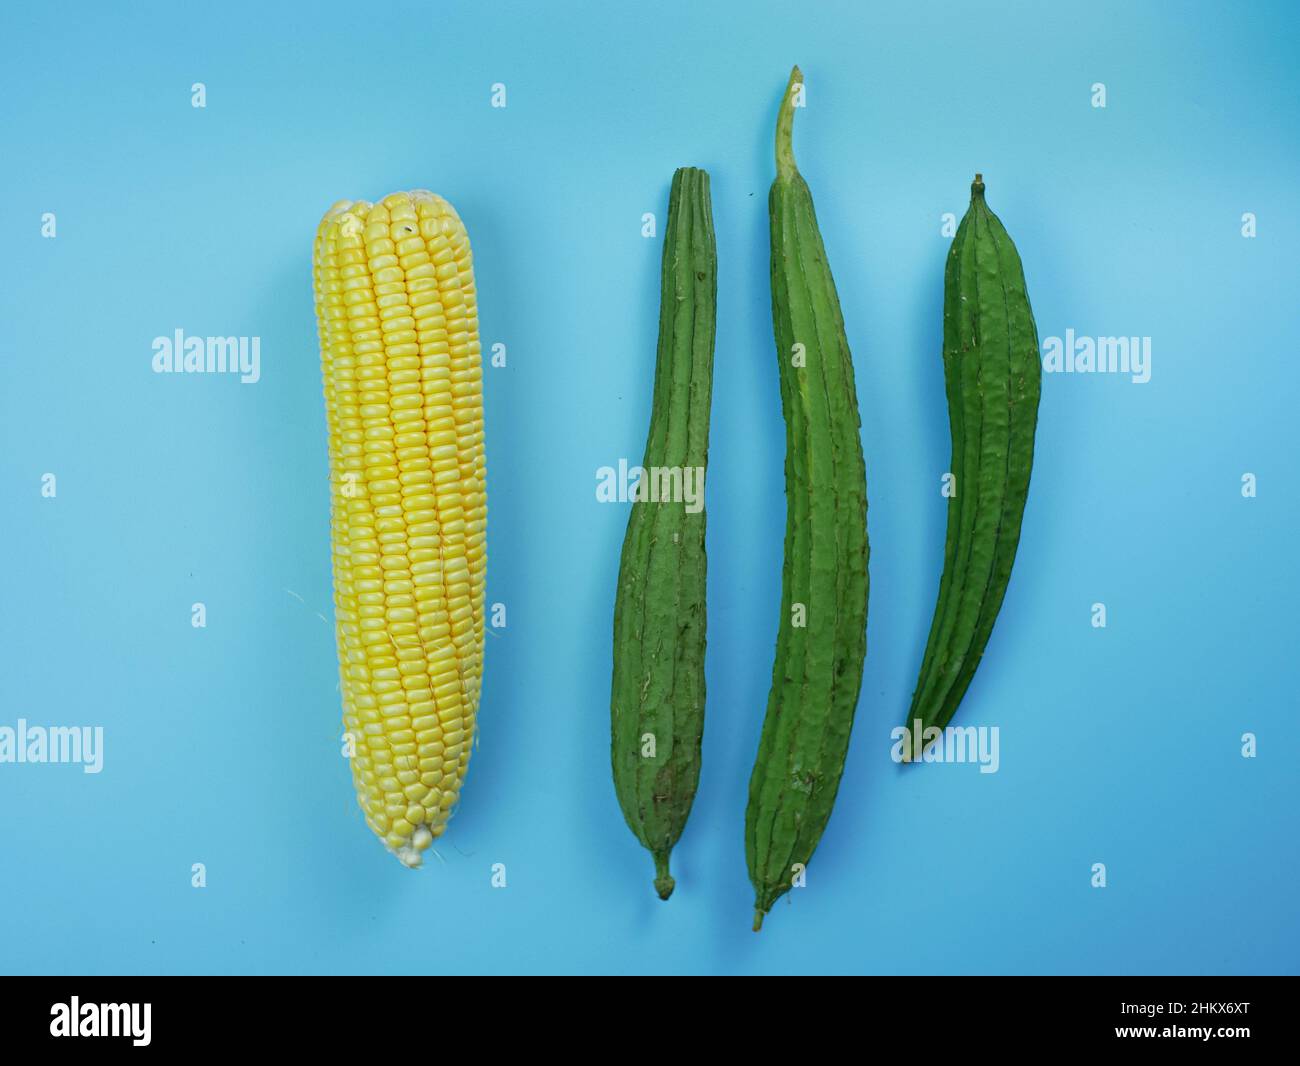 corn and luffa acutangula on blue background. healthy vegetable concept. Stock Photo